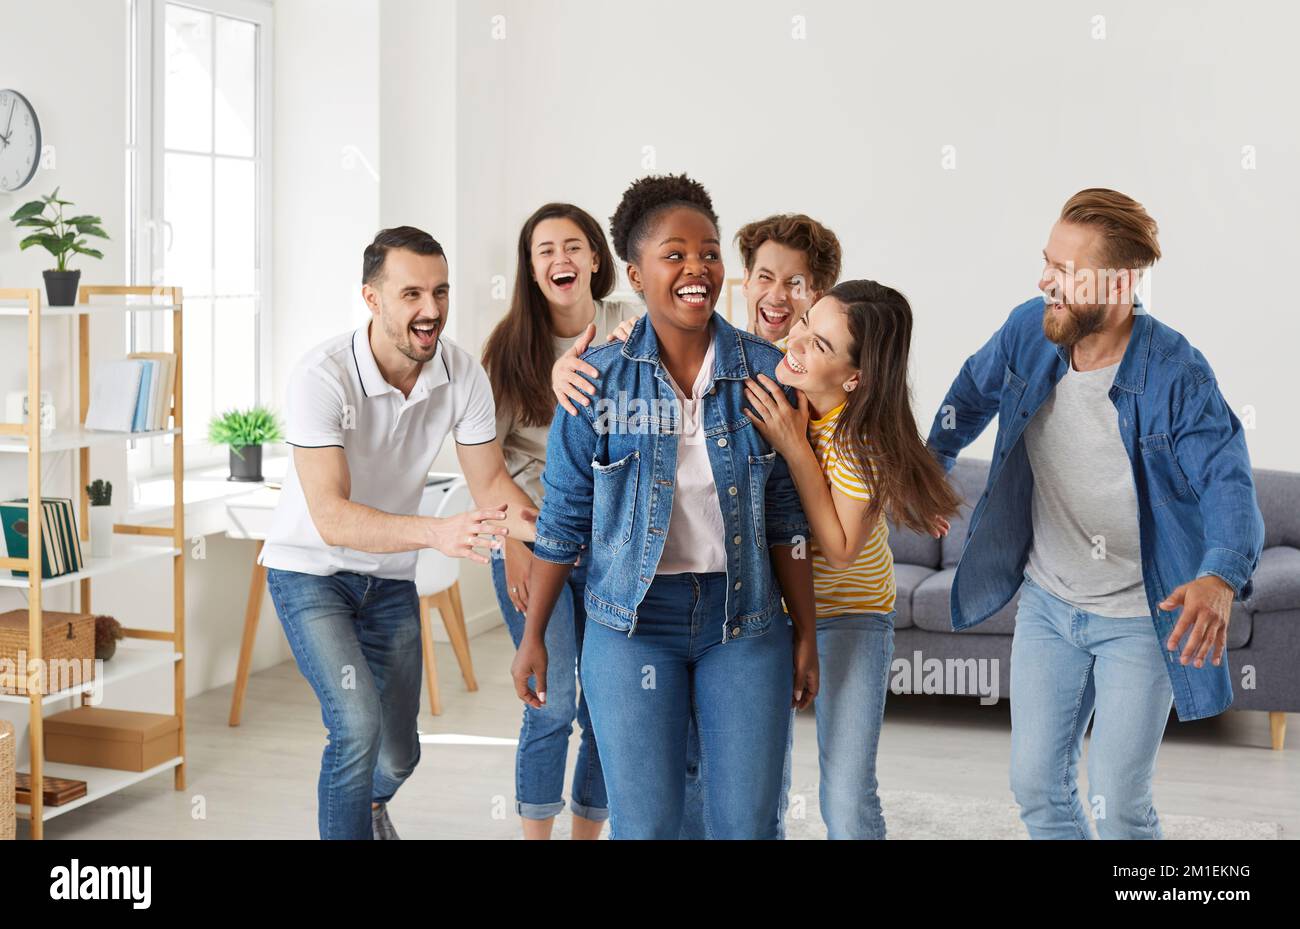 Happy young African American woman having fun with her friends at a party at home Stock Photo